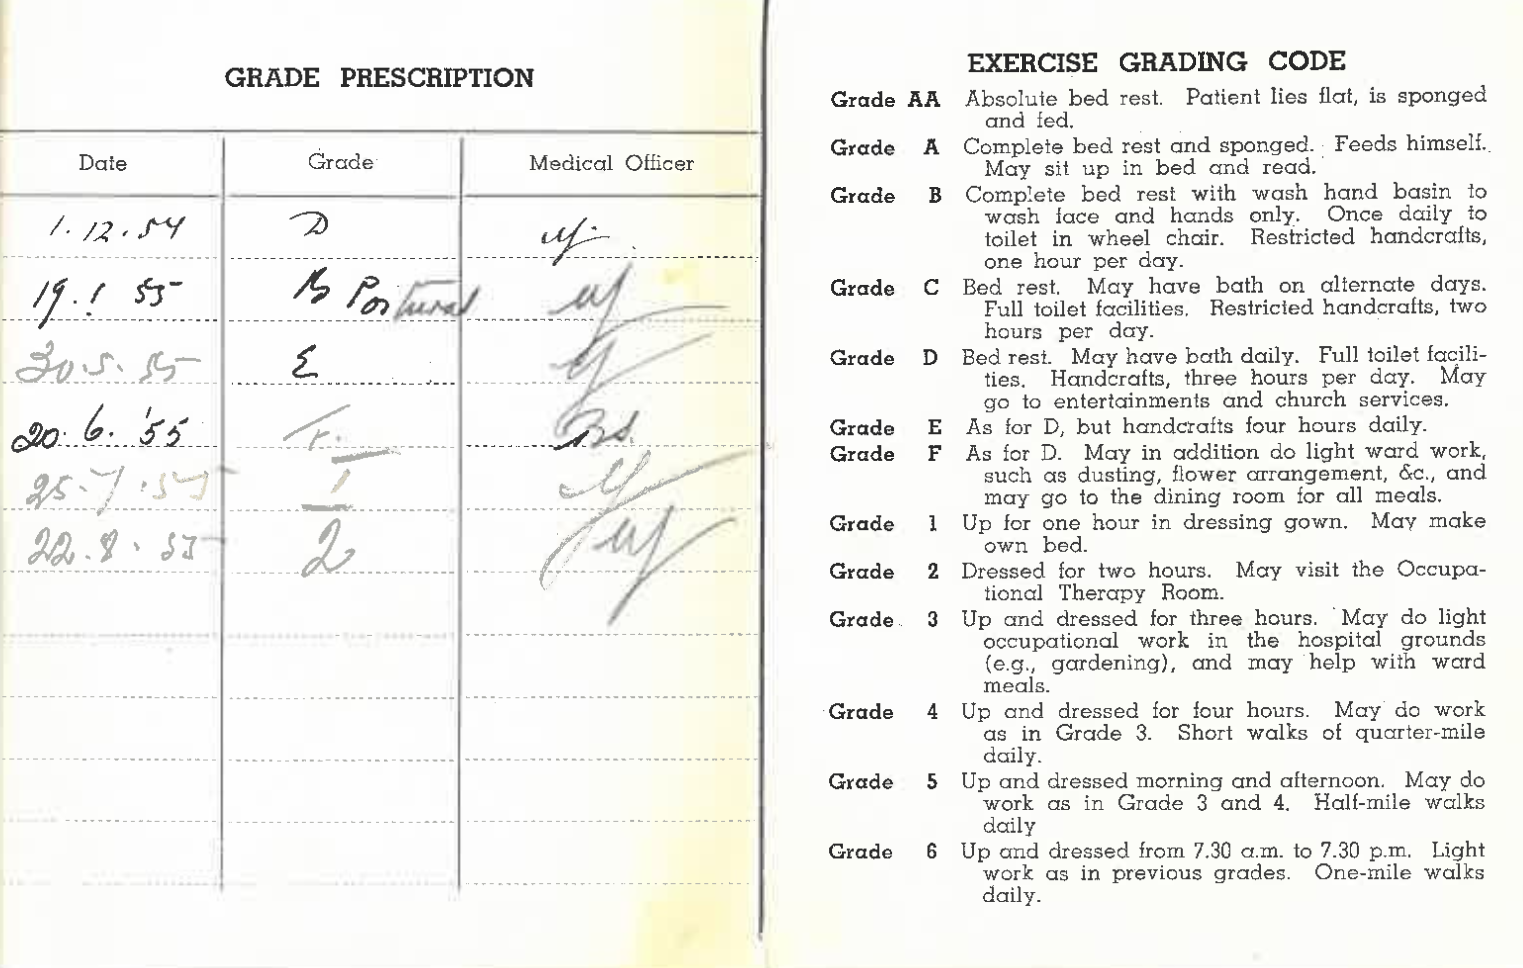 An old hospital card that grades patients with TB.